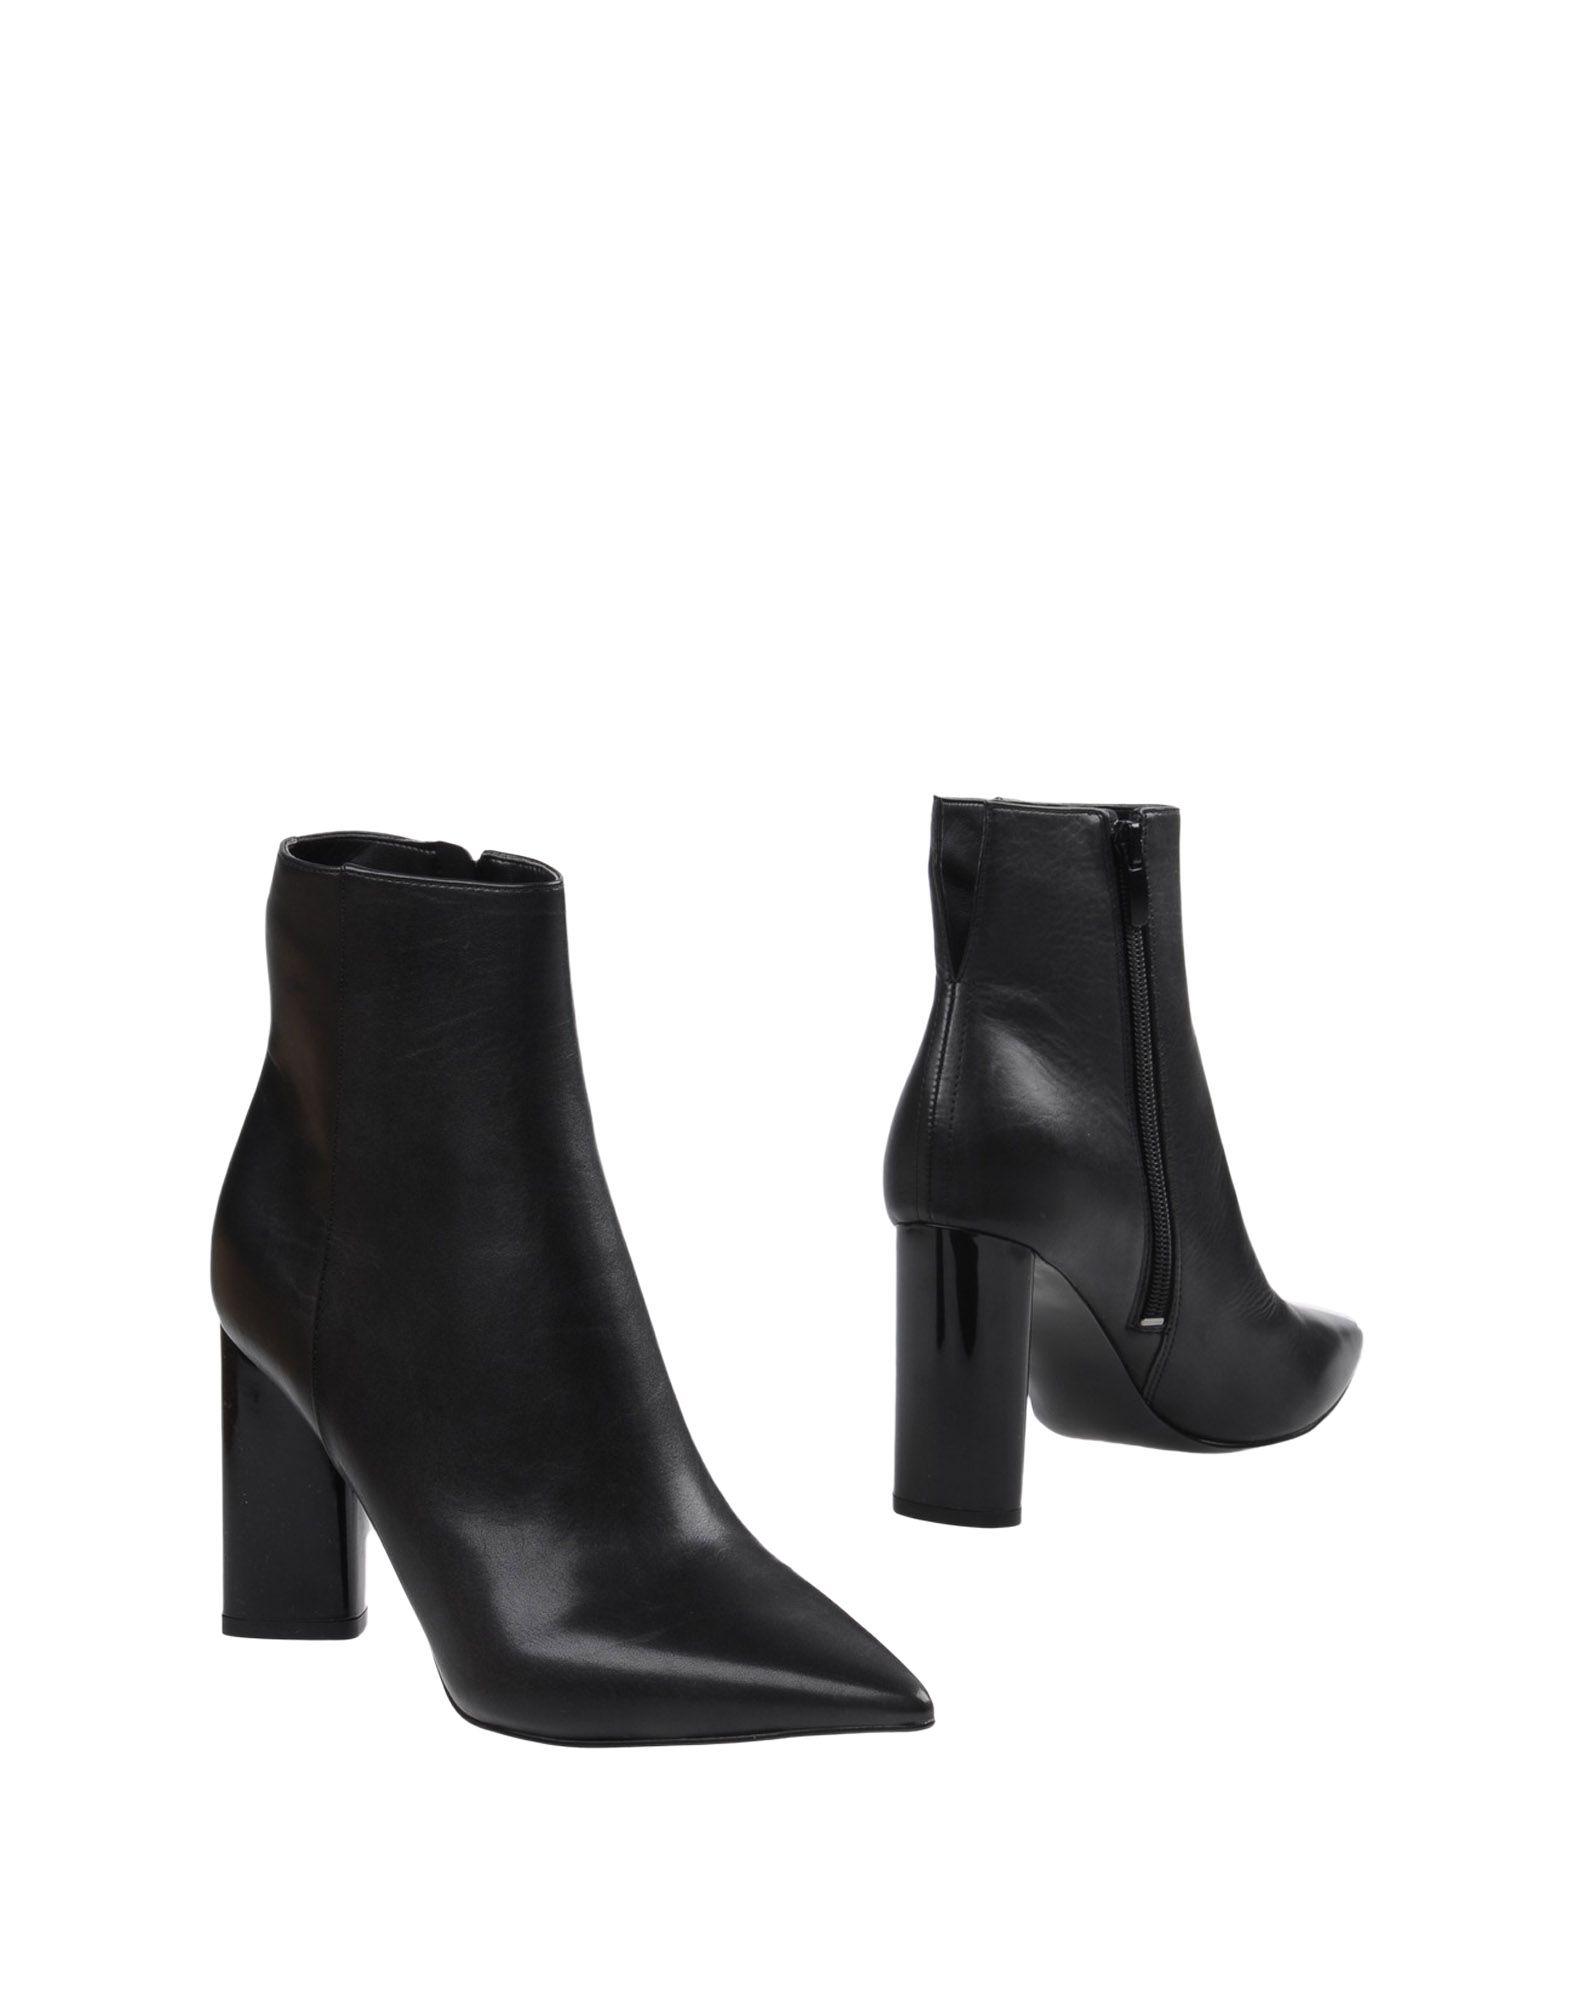 Kendall + Kylie Leather Ankle Boots in Black - Lyst